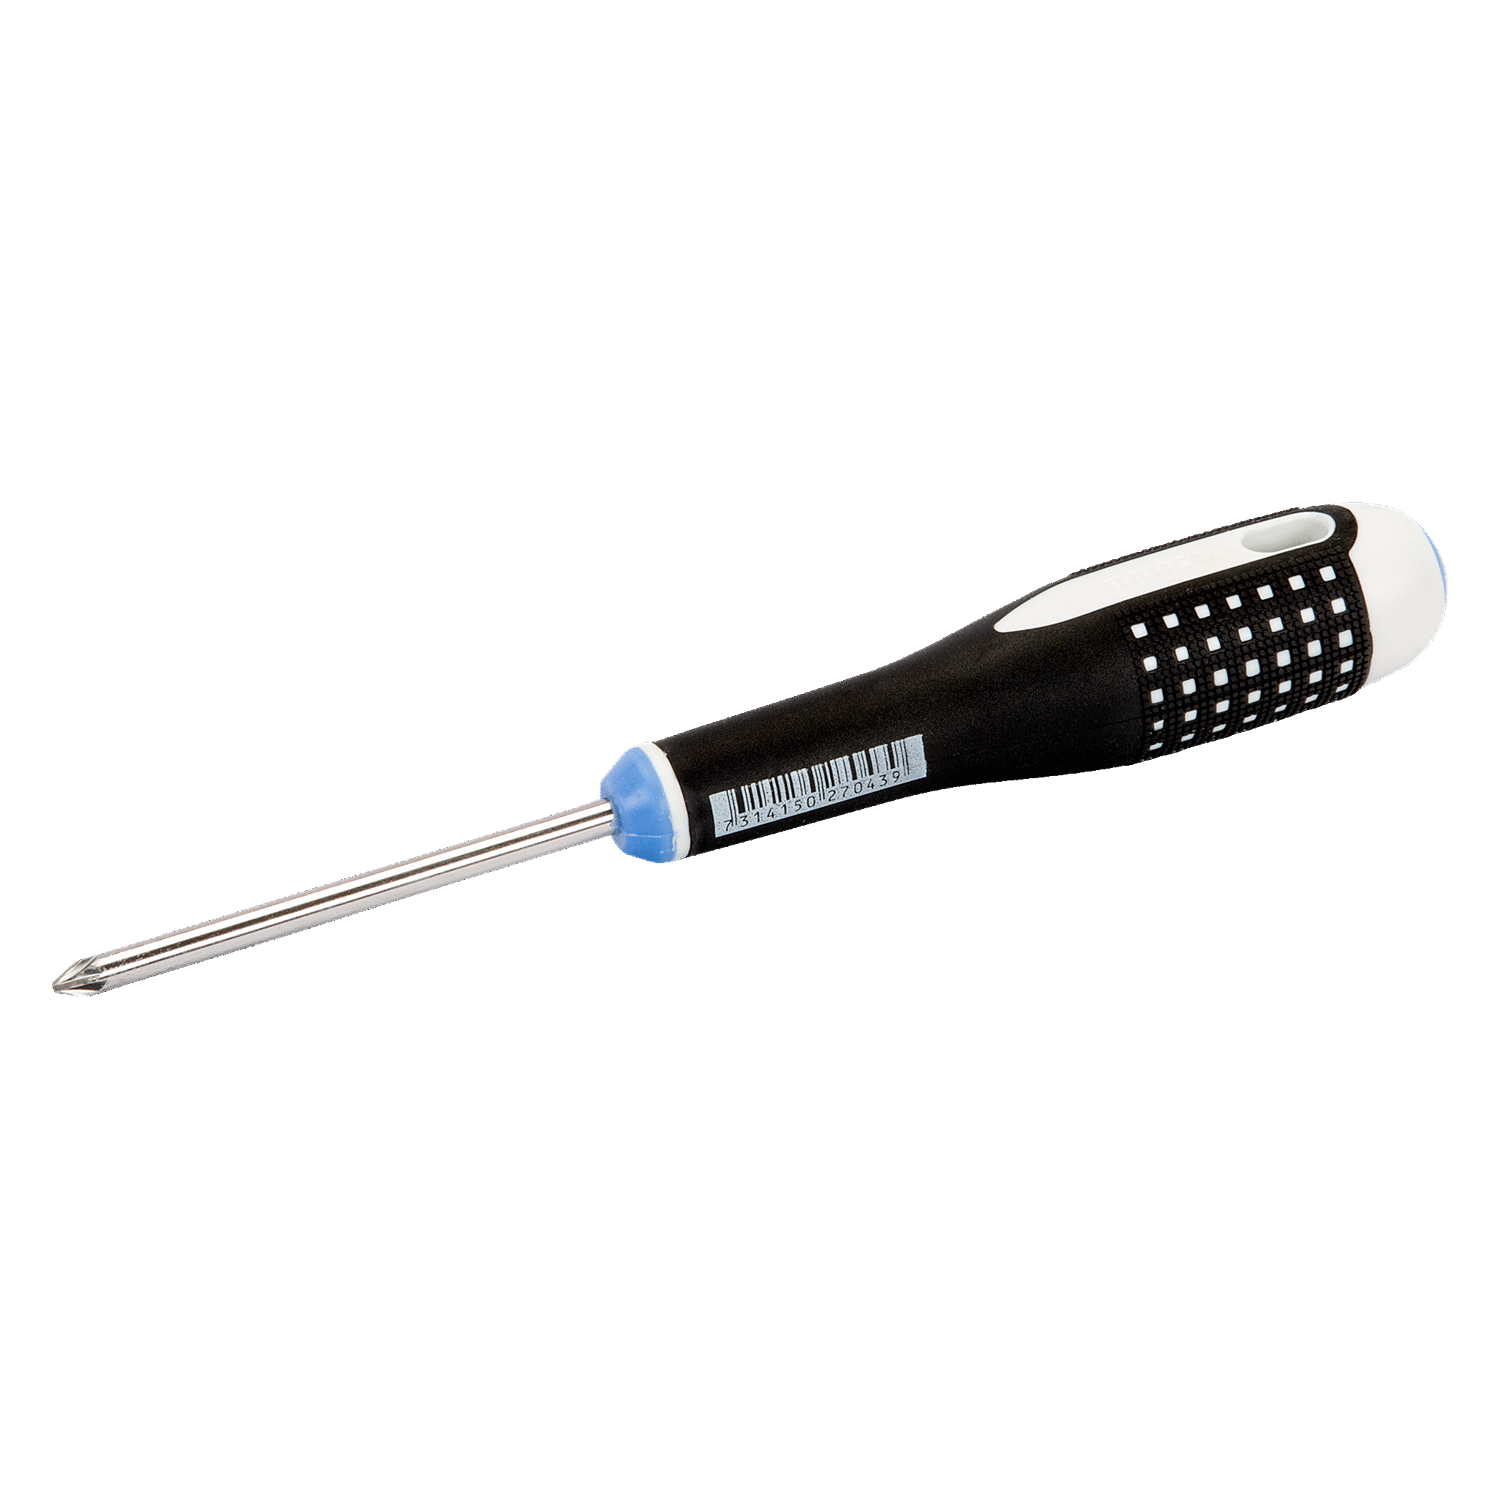 BAHCO BE-8800i - BE-8823i Pozidriv Screwdriver (BAHCO Tools) - Premium Pozidriv Screwdriver from BAHCO - Shop now at Yew Aik.